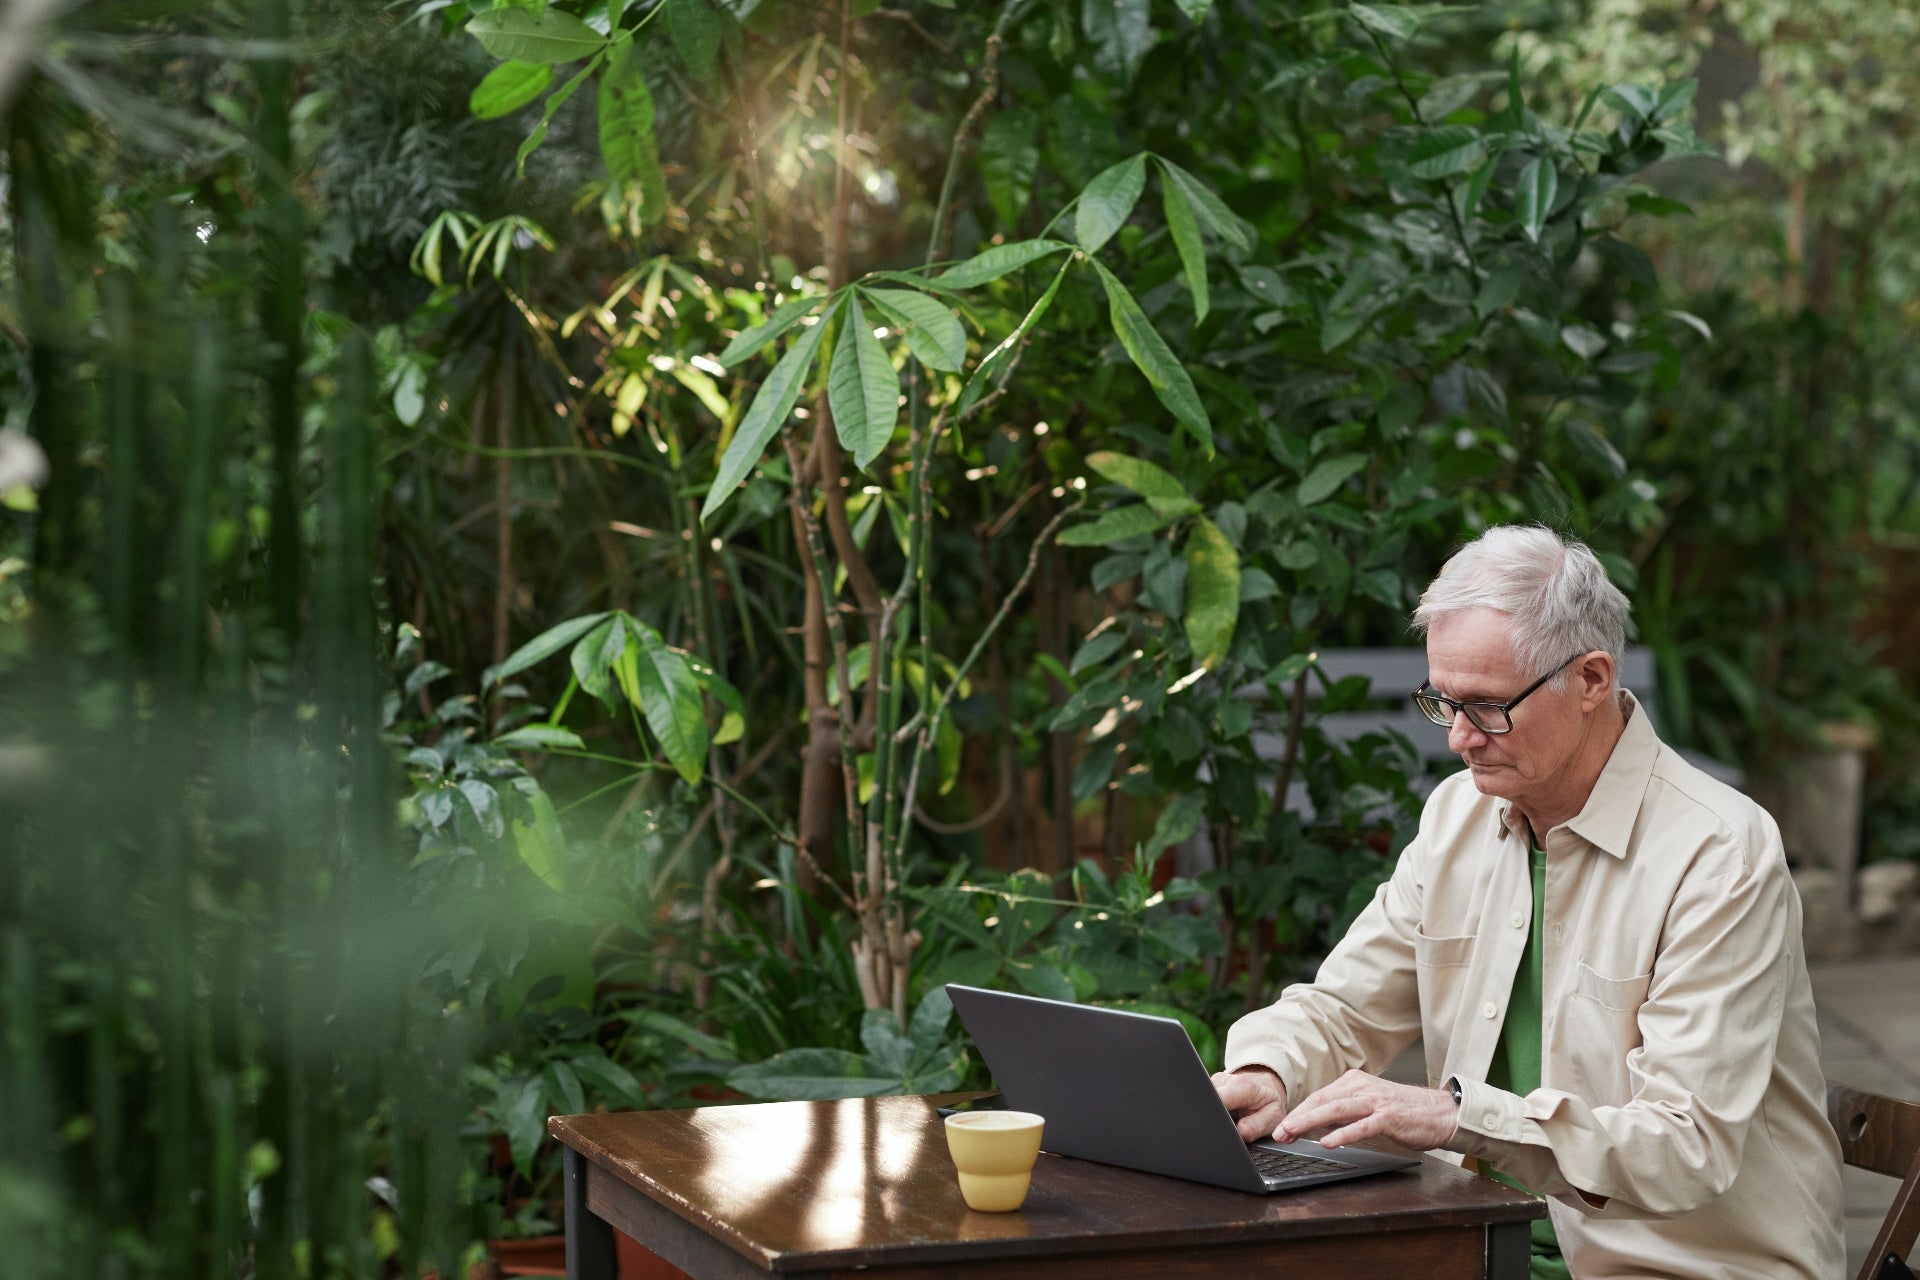 An older man sits at a table on a laptop, surrounded by lush greenery.